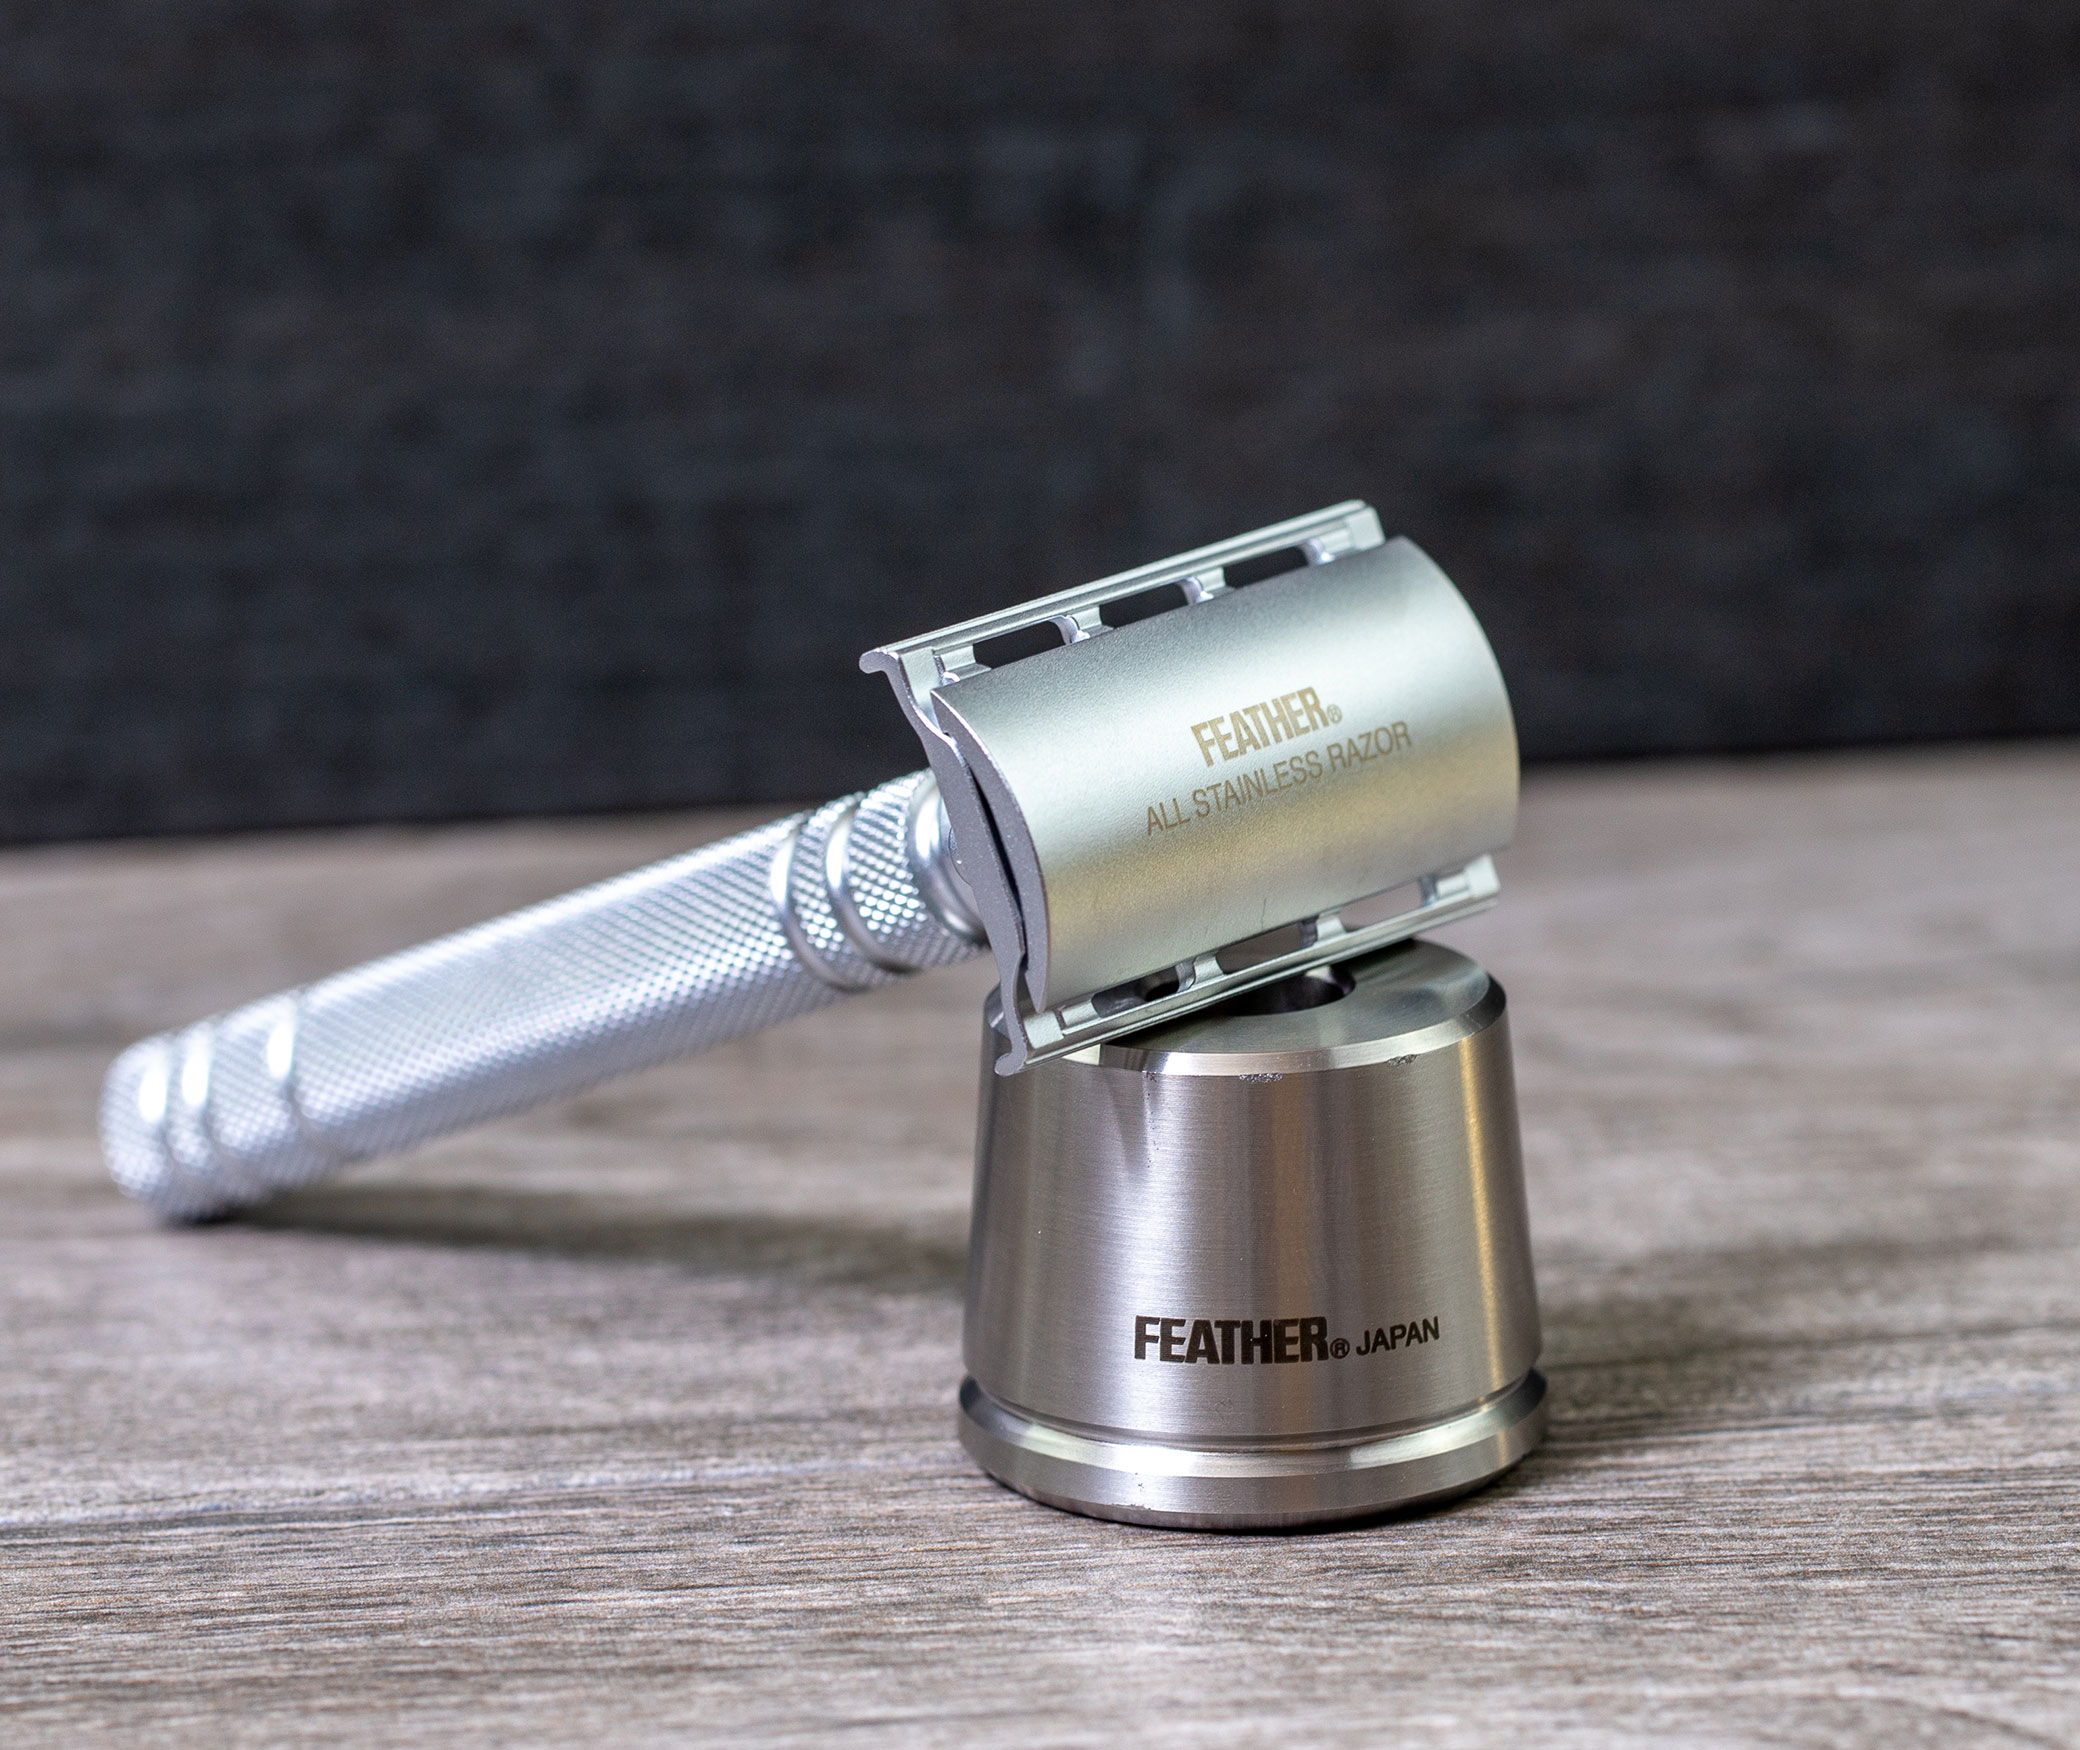 Feather Stainless Steel Double Edge Safety Razor with Stand